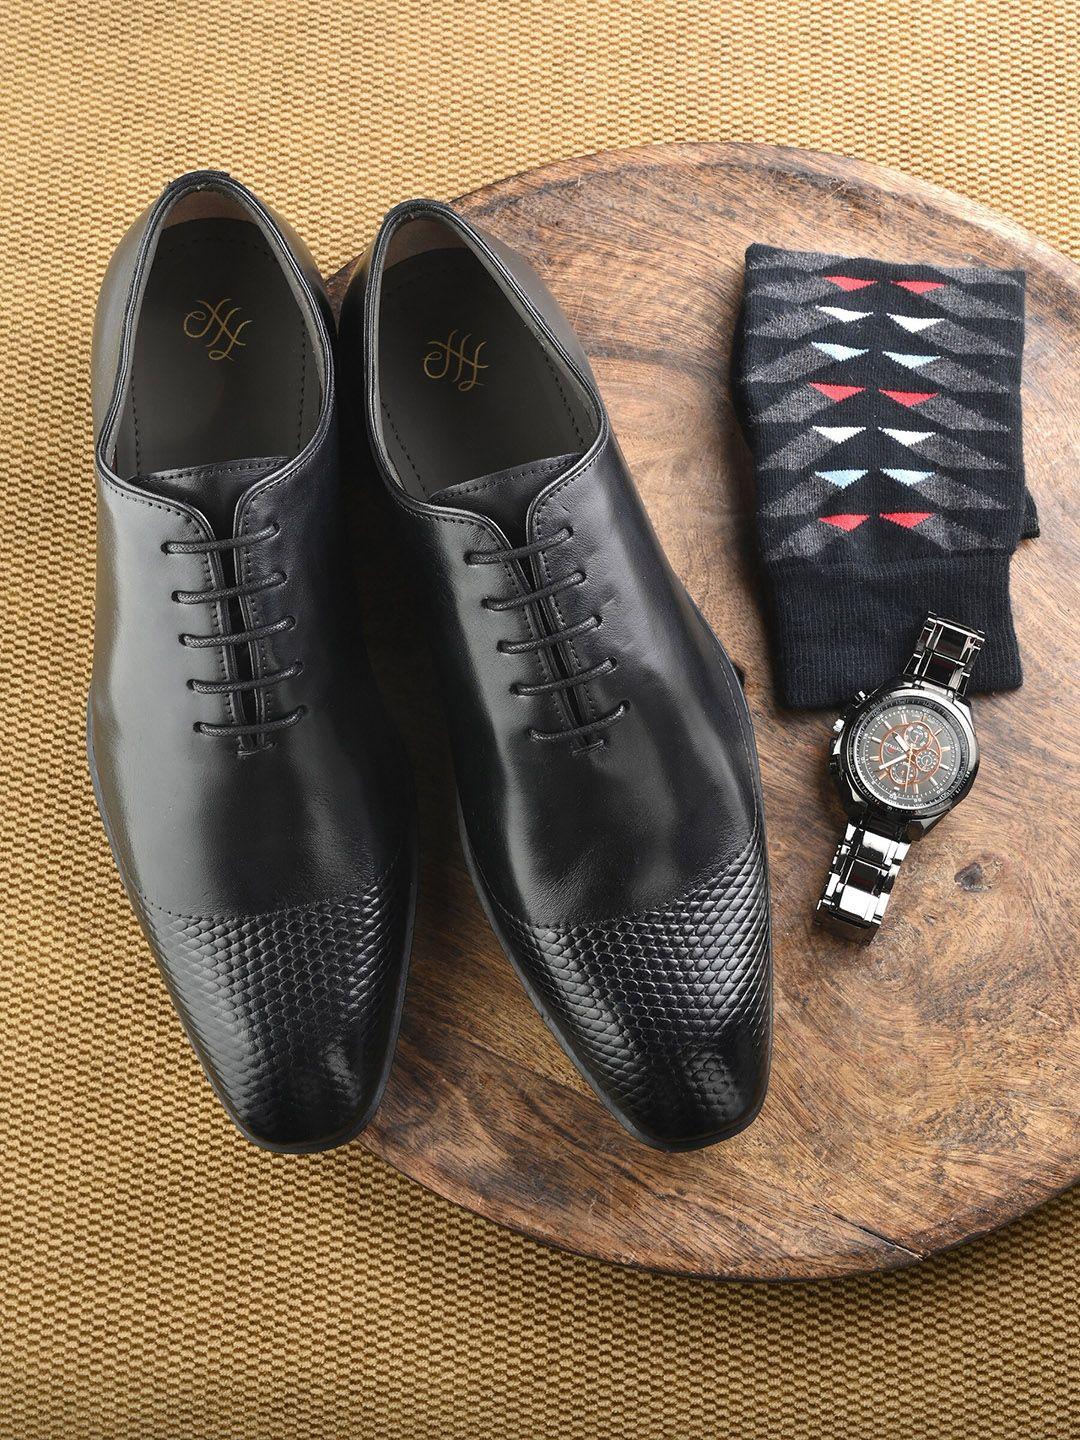 house of pataudi men leather formal oxfords shoes